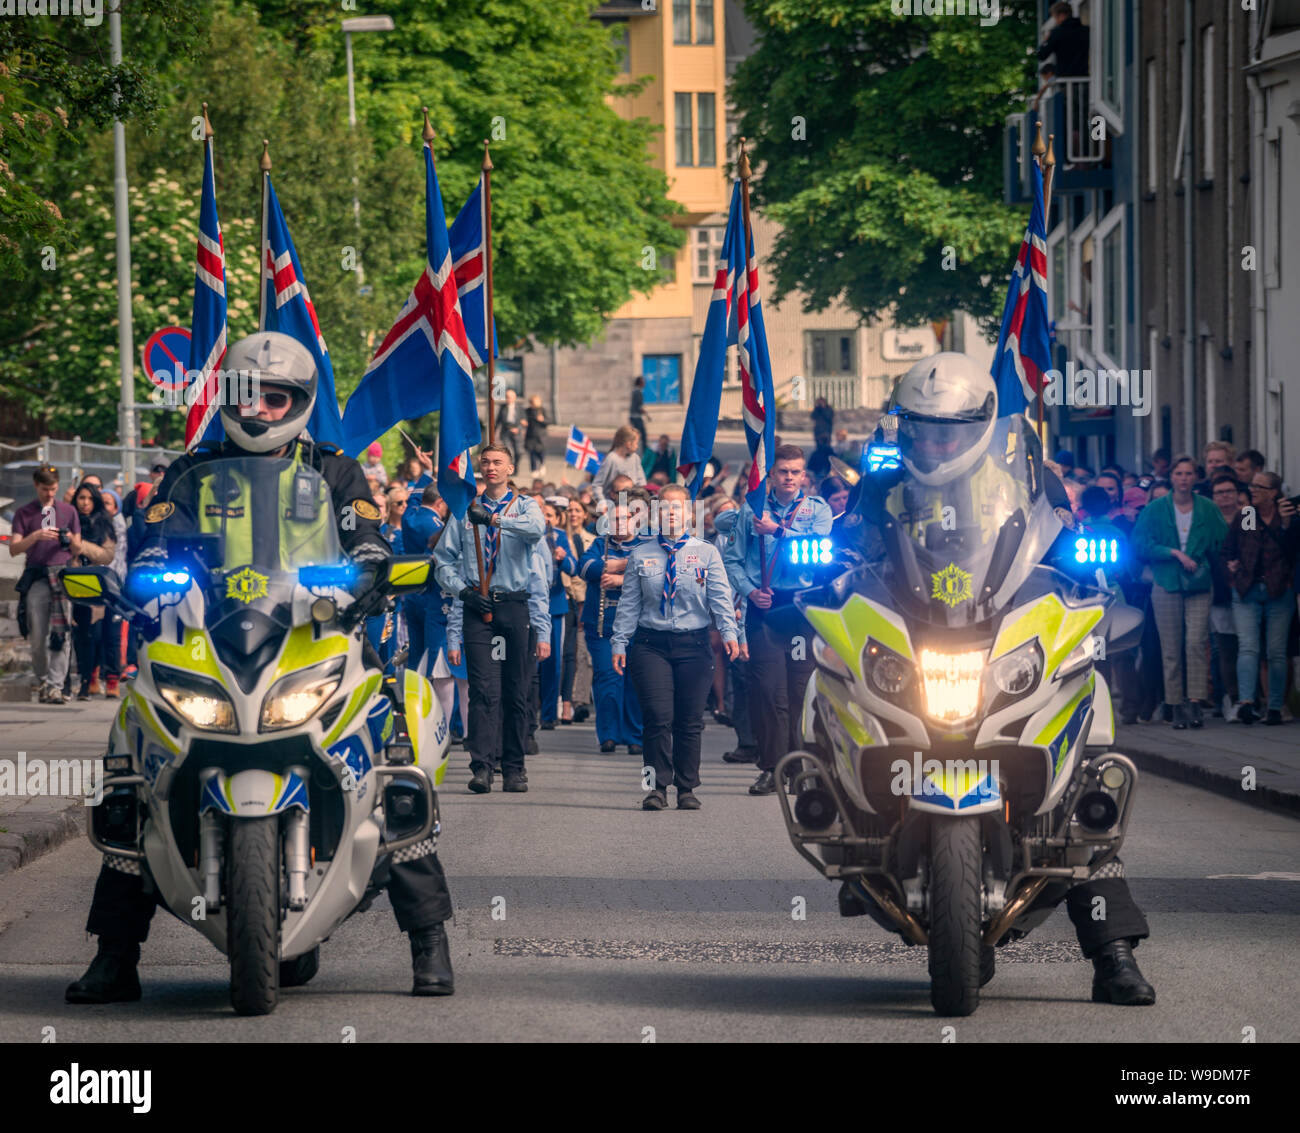 Scouts being escorted by Icelandic police during a parade, celebrating Independence day, Reykjavik, Iceland Stock Photo